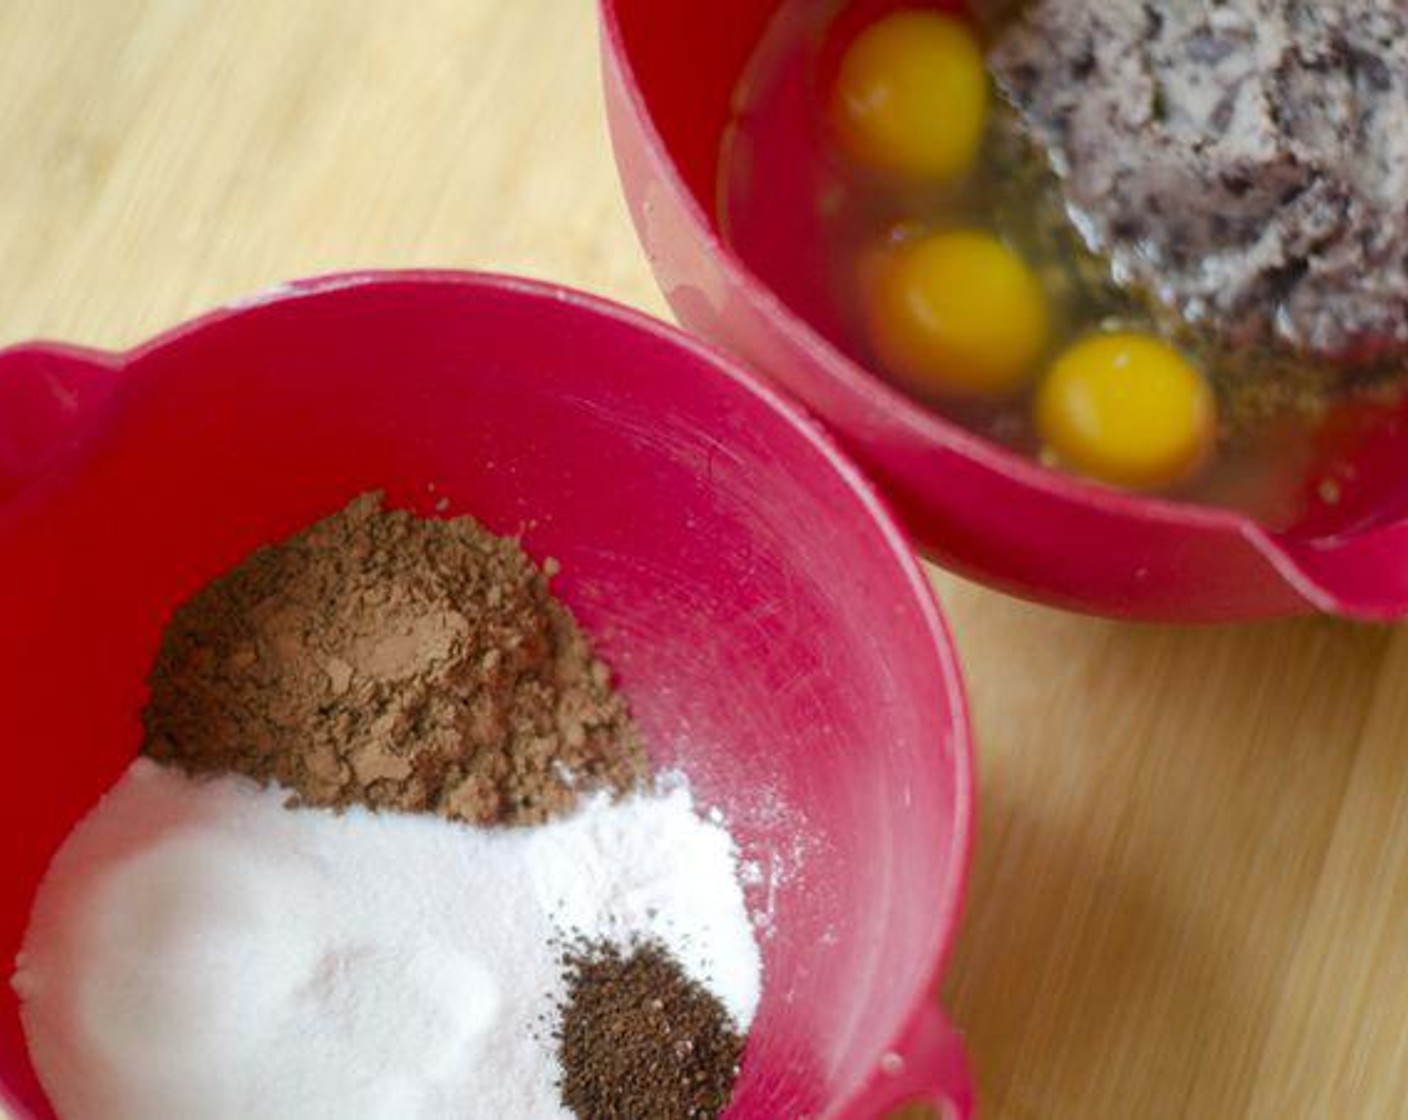 step 2 Mix black beans, Eggs (3), Oil (3 Tbsp), and Vanilla Extract (1 tsp). In a separate bowl mix Unsweetened Cocoa Powder (1/4 cup), Caster Sugar (2/3 cup), Baking Powder (1/2 tsp), Salt (1/4 tsp), and Ground Coffee (1/2 tsp), if you have it.